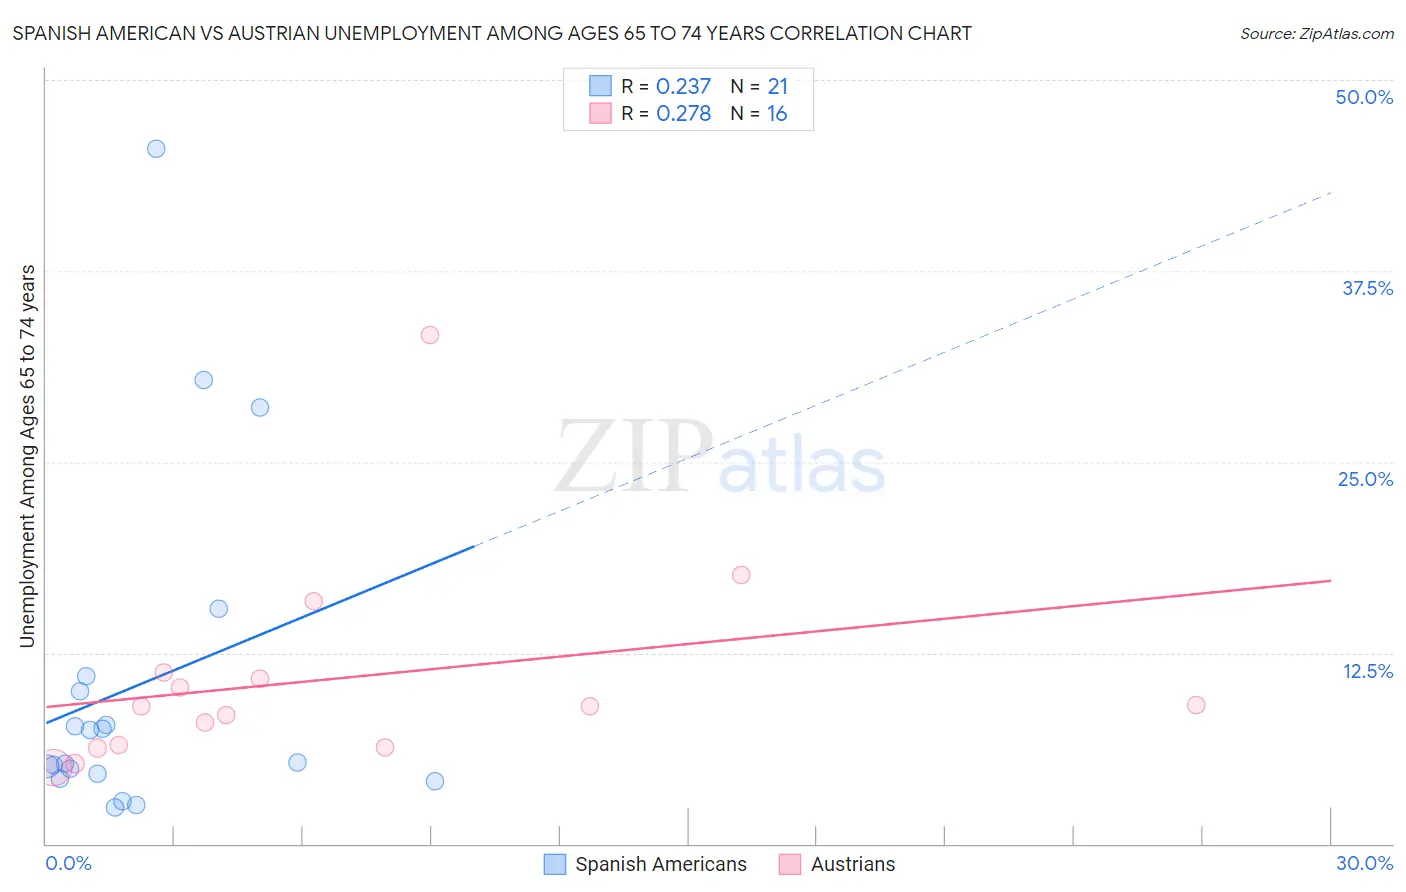 Spanish American vs Austrian Unemployment Among Ages 65 to 74 years